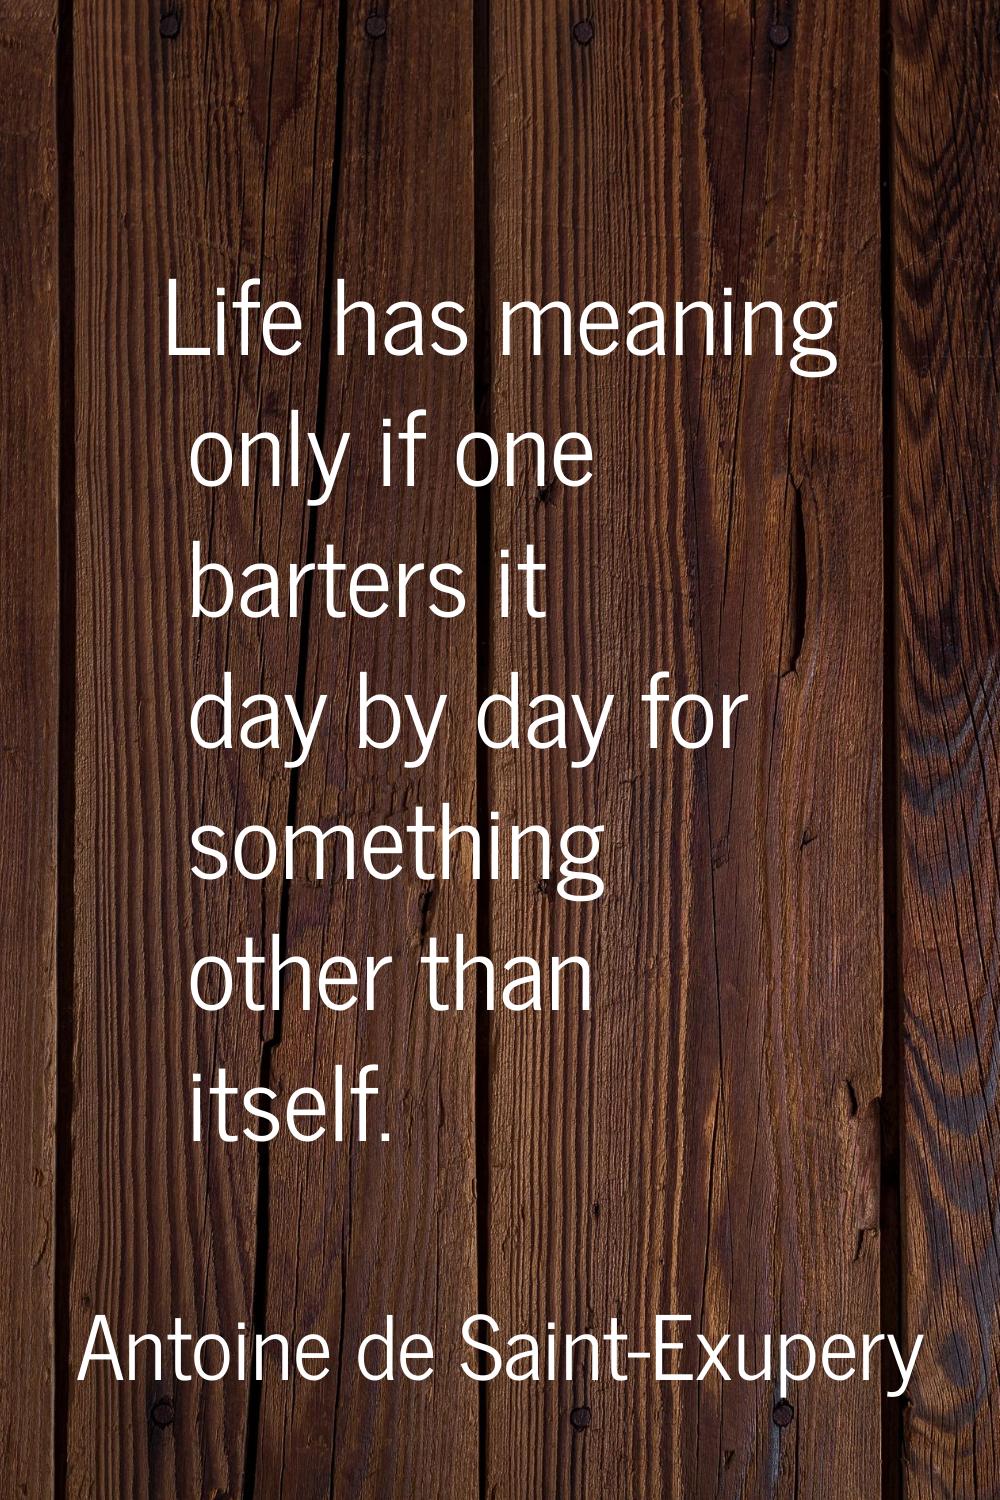 Life has meaning only if one barters it day by day for something other than itself.